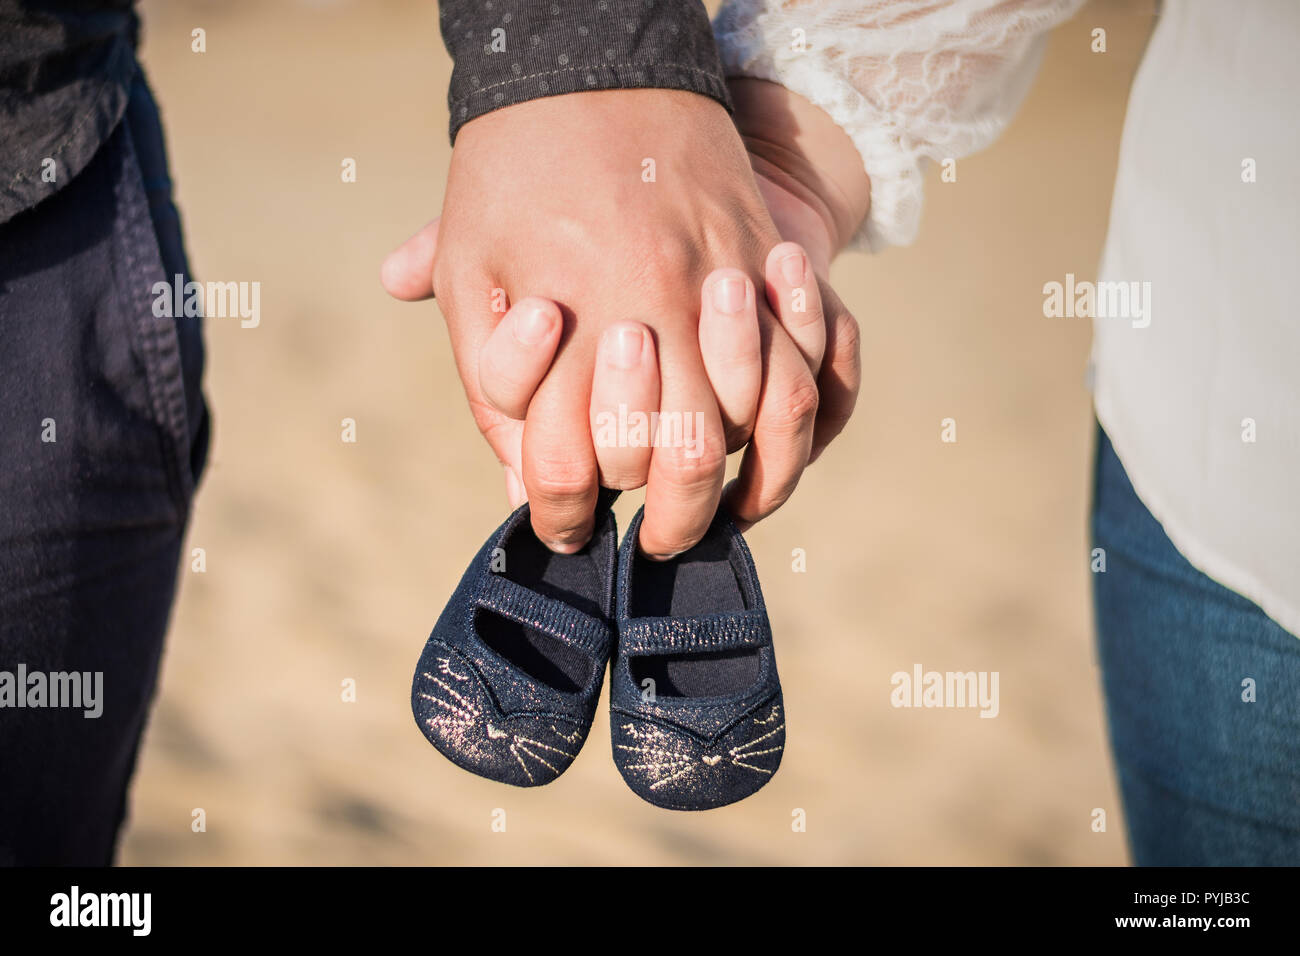 Pregnant woman and man holding baby shoes in hands. Future mom and dad, parents is holding little newborn baby shoes. Birth expectation concept. Waiti Stock Photo